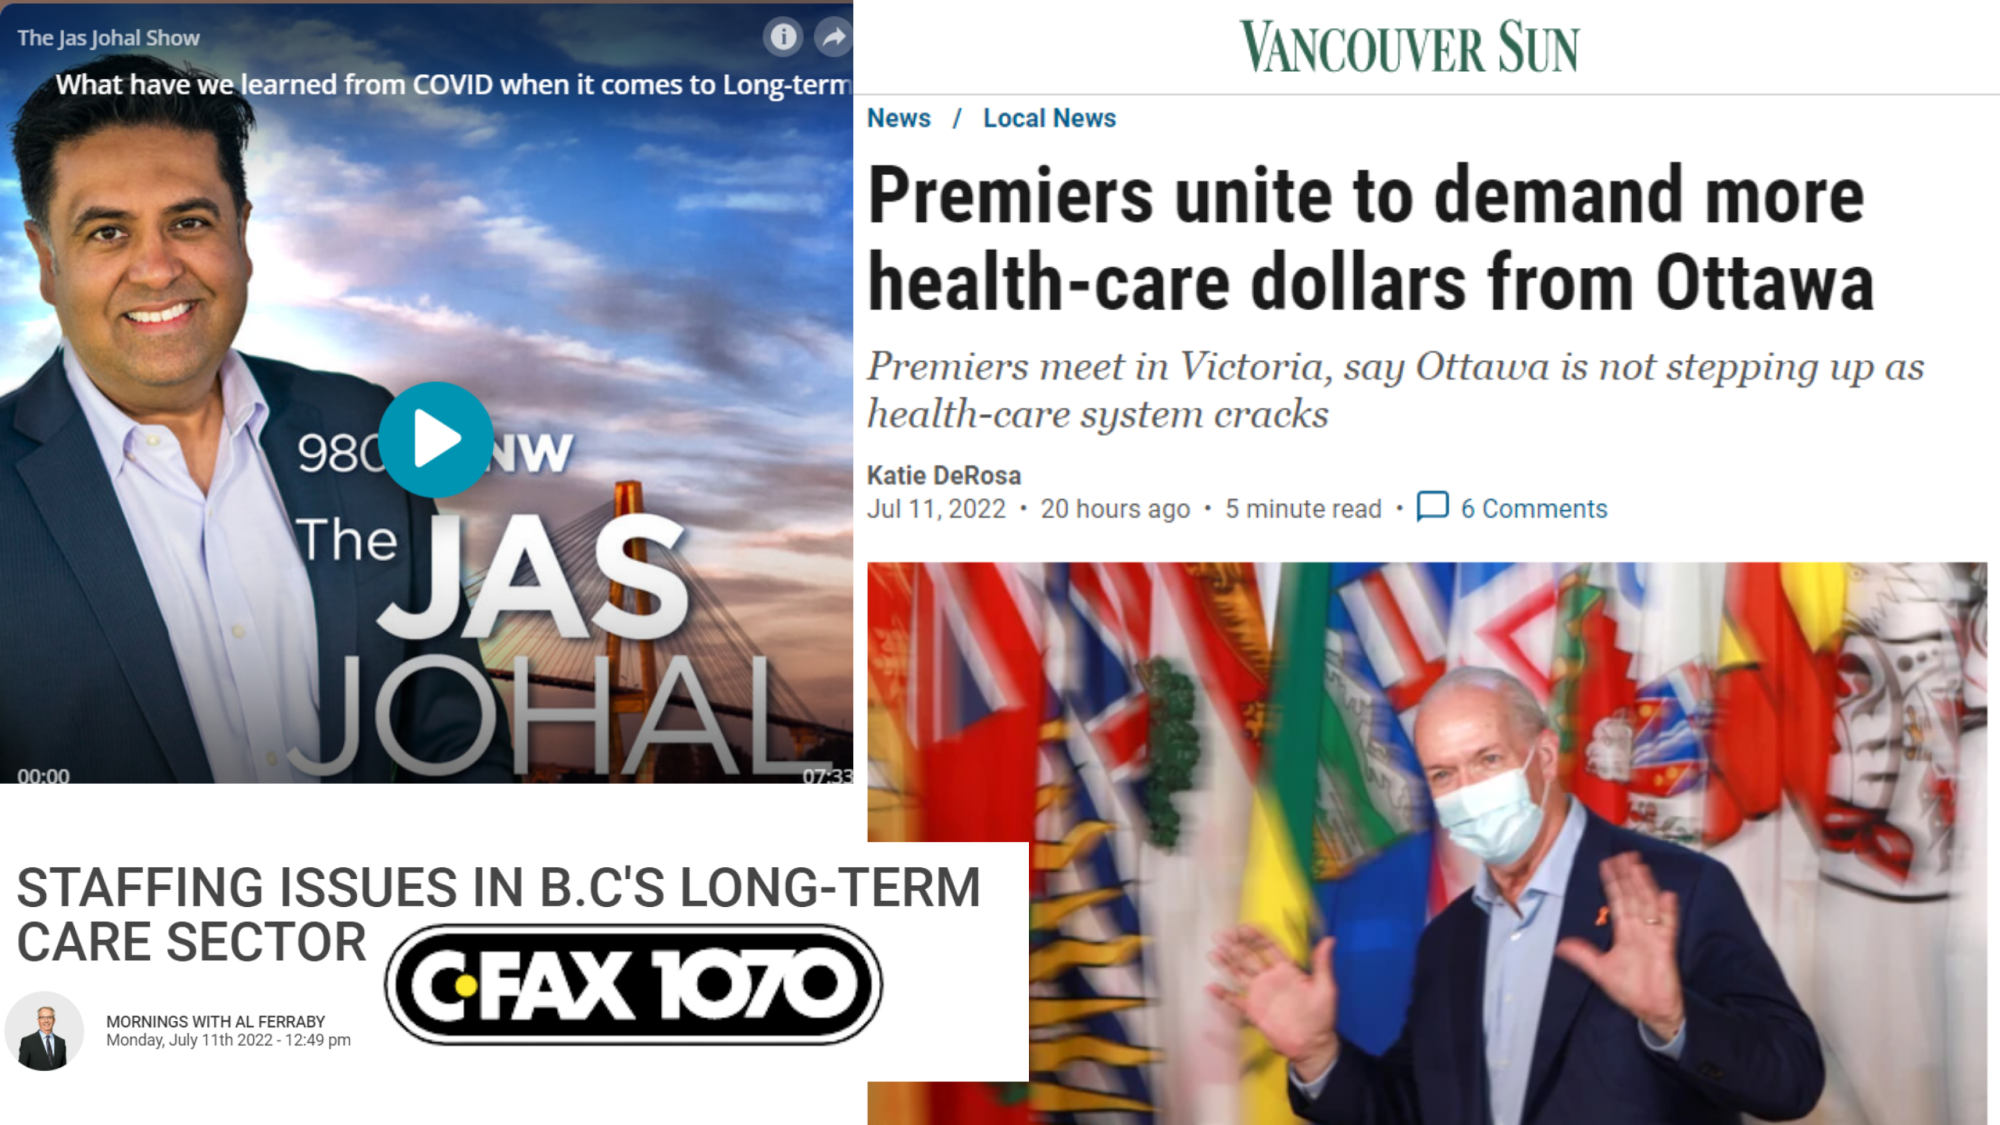 Media Wrap Up: Staffing and funding issues in long-term care